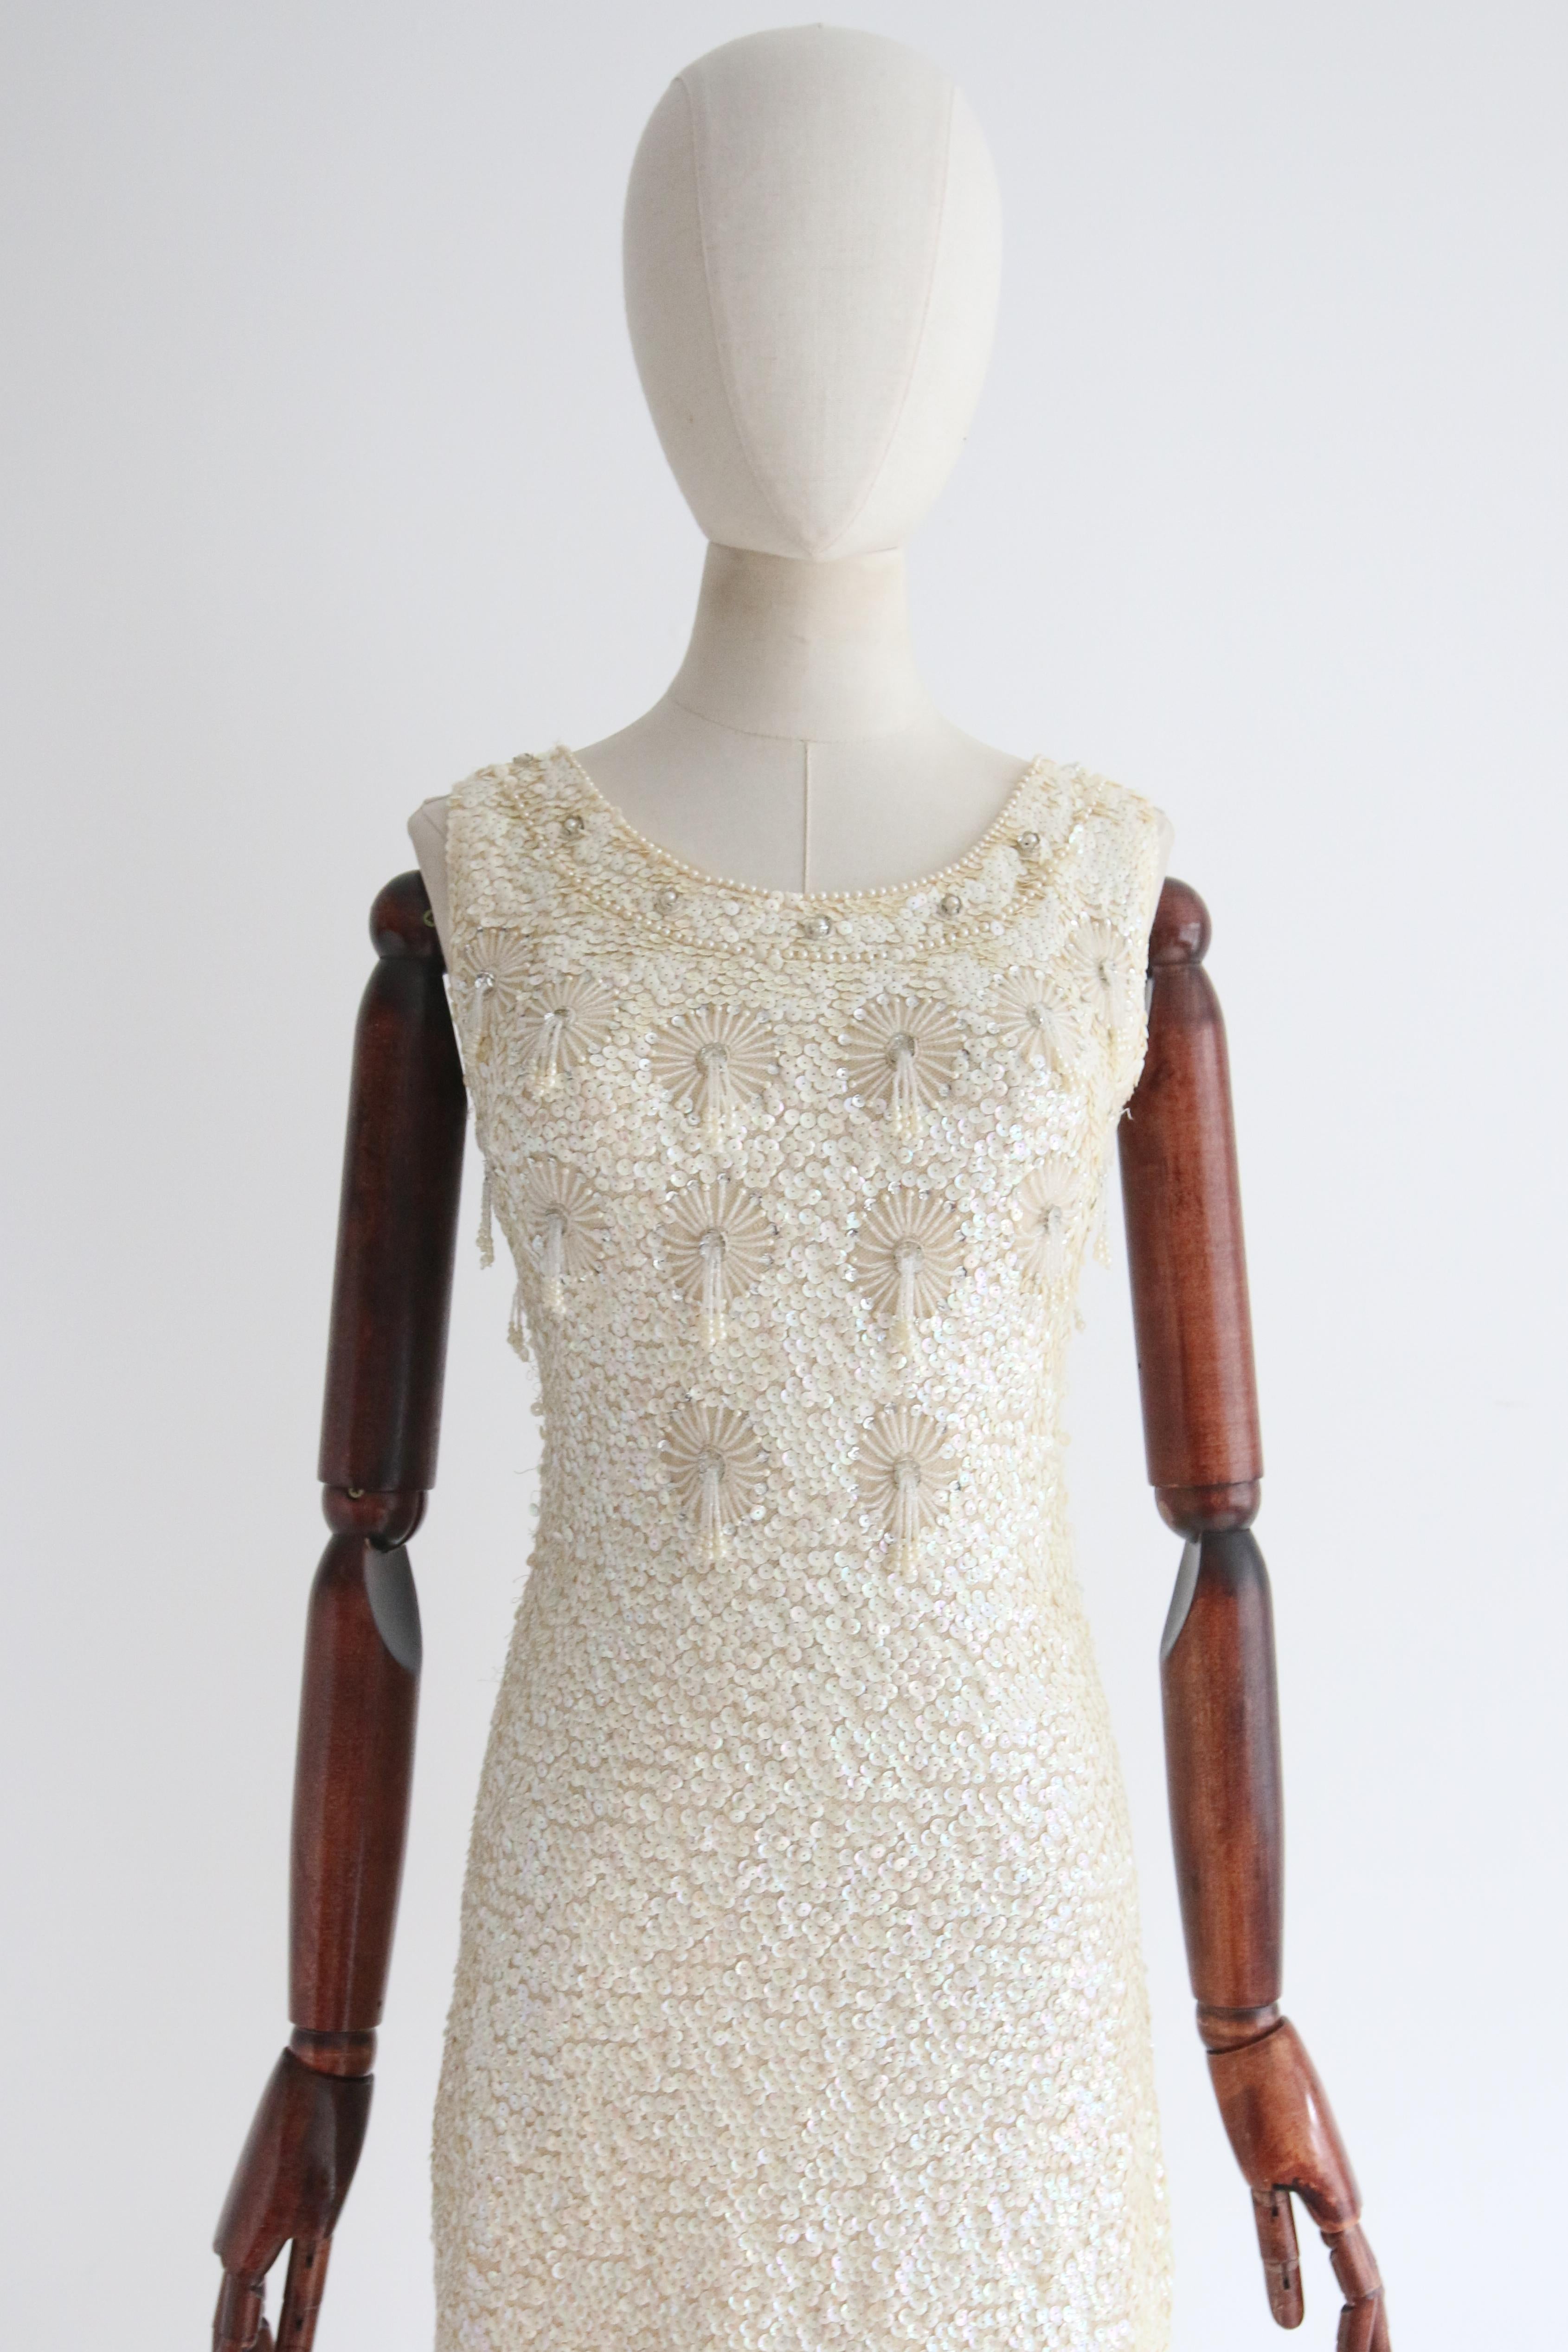 This breathtaking 1960's cream knitted wool dress, embellished in its entirety with cream iridescent sequins, and finished with floral beaded details, is the perfect piece for a sparkling occasion.

The rounded scoop neckline of the dress is framed